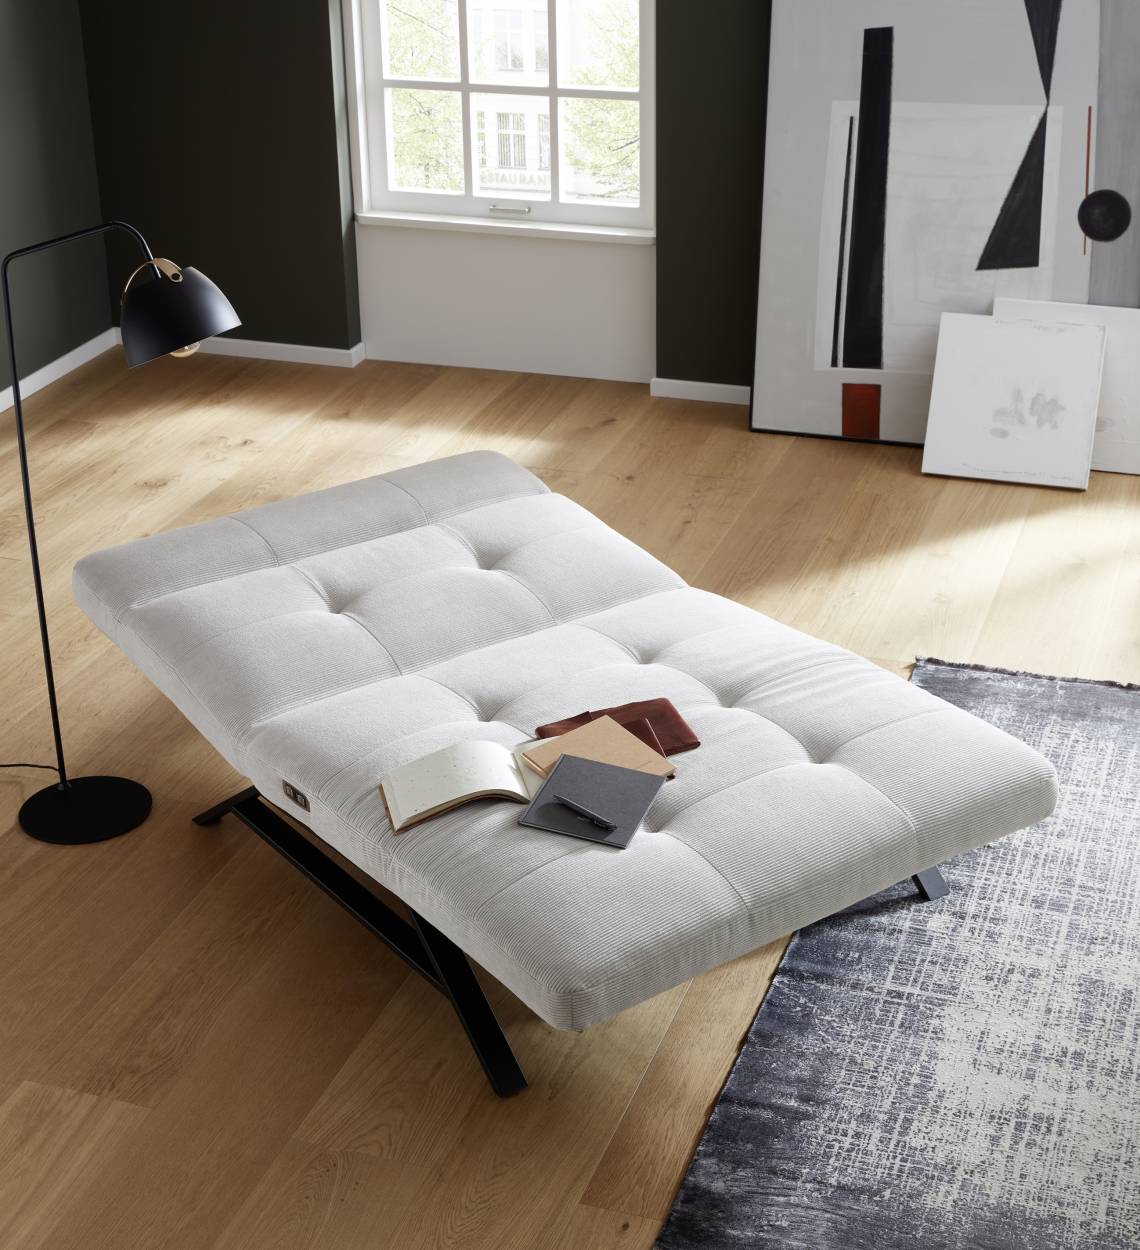 Marc Harris - Relaxliege TL 1546 mit Daybed-Funktion